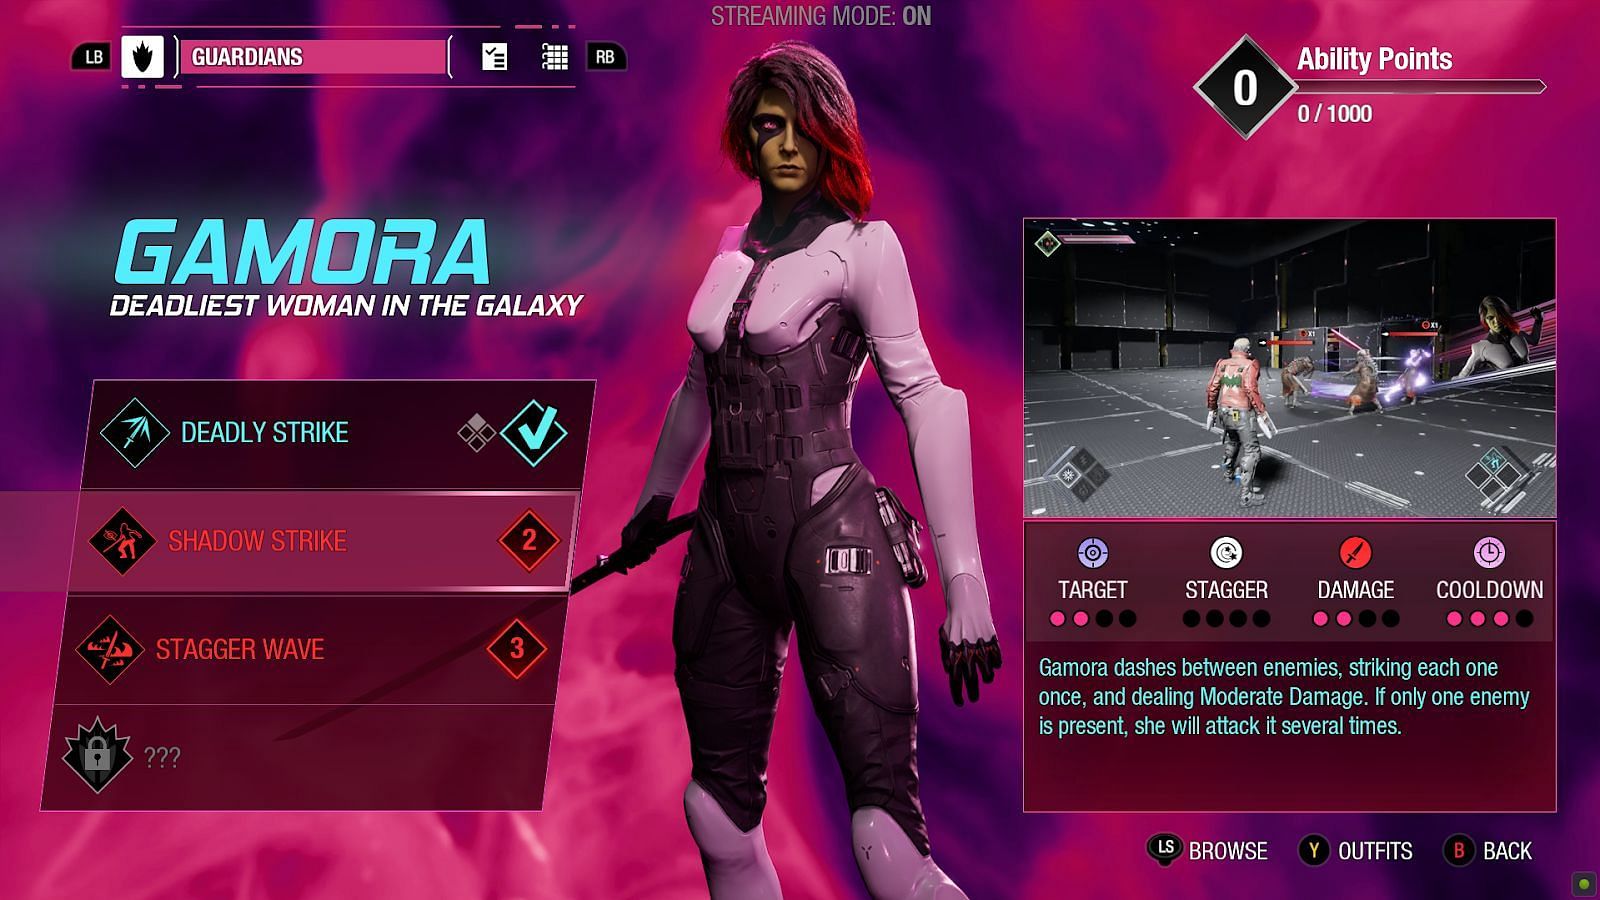 Abilities of Gamora (Screenshot via Marvel&rsquo;s Guardians of the Galaxy)